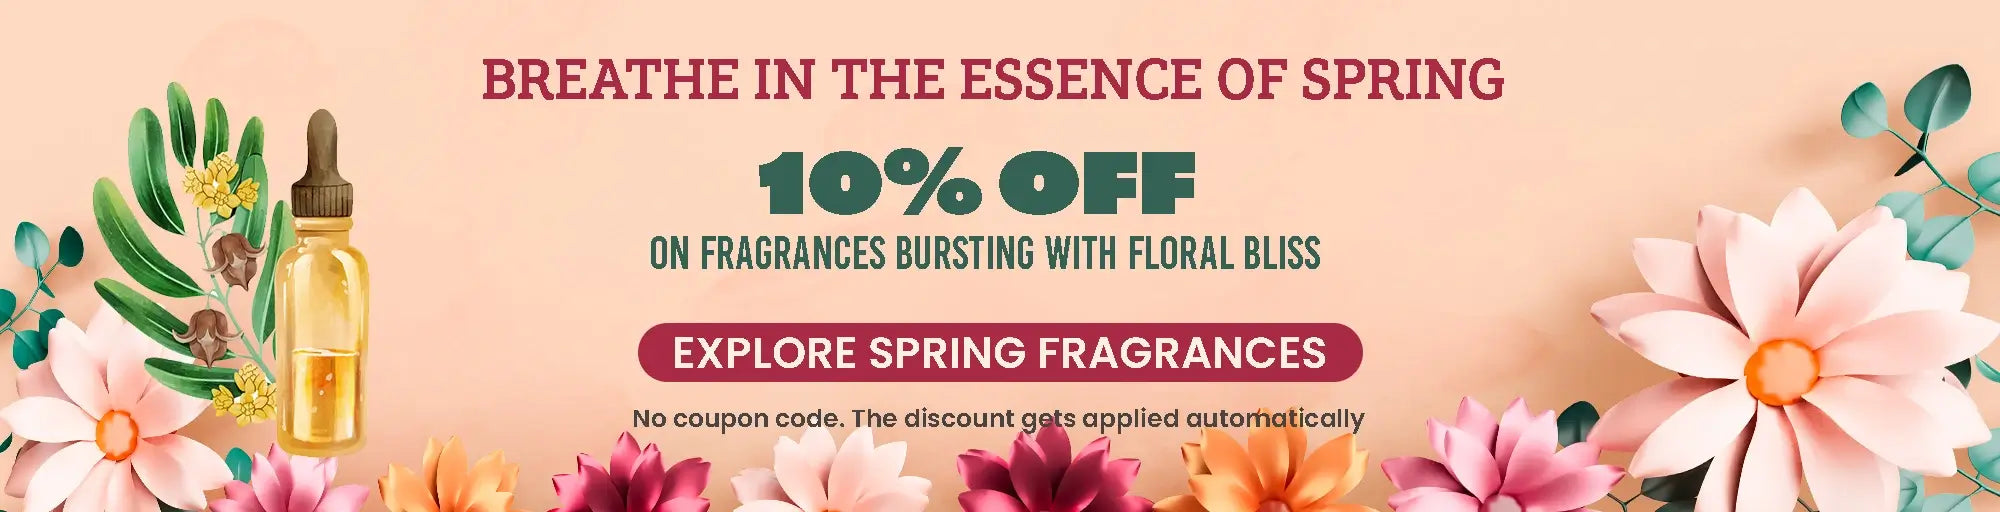 Enjoy the Essence of Spring Fragrances with 10% off on Floral Scents